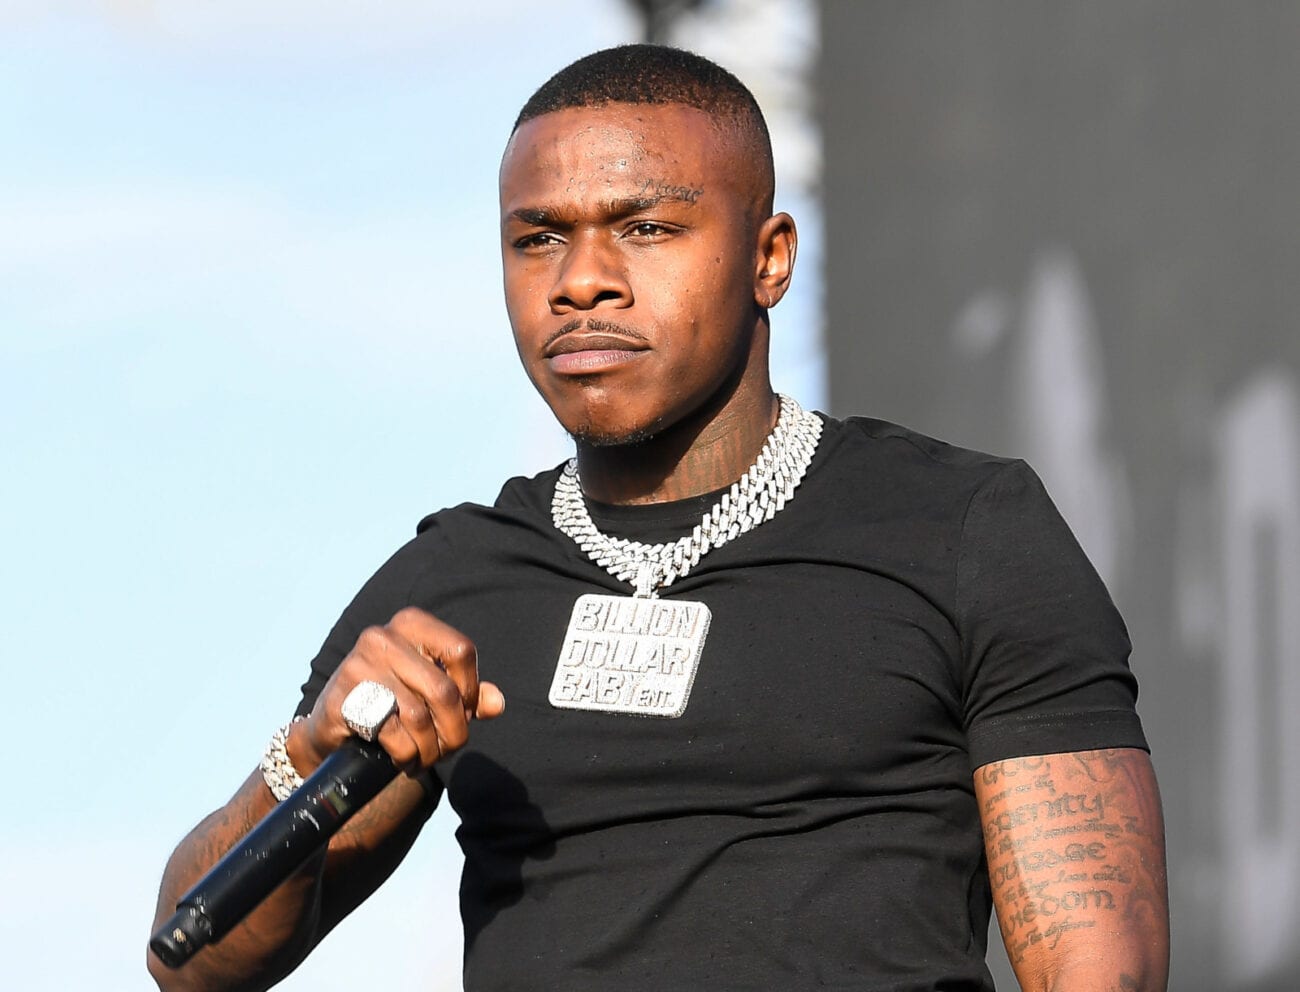 After a shootout in Miami reportedly involving rapper DaBaby, fans are wondering if his daughter was a motive. Find out why the shooting escalated here.